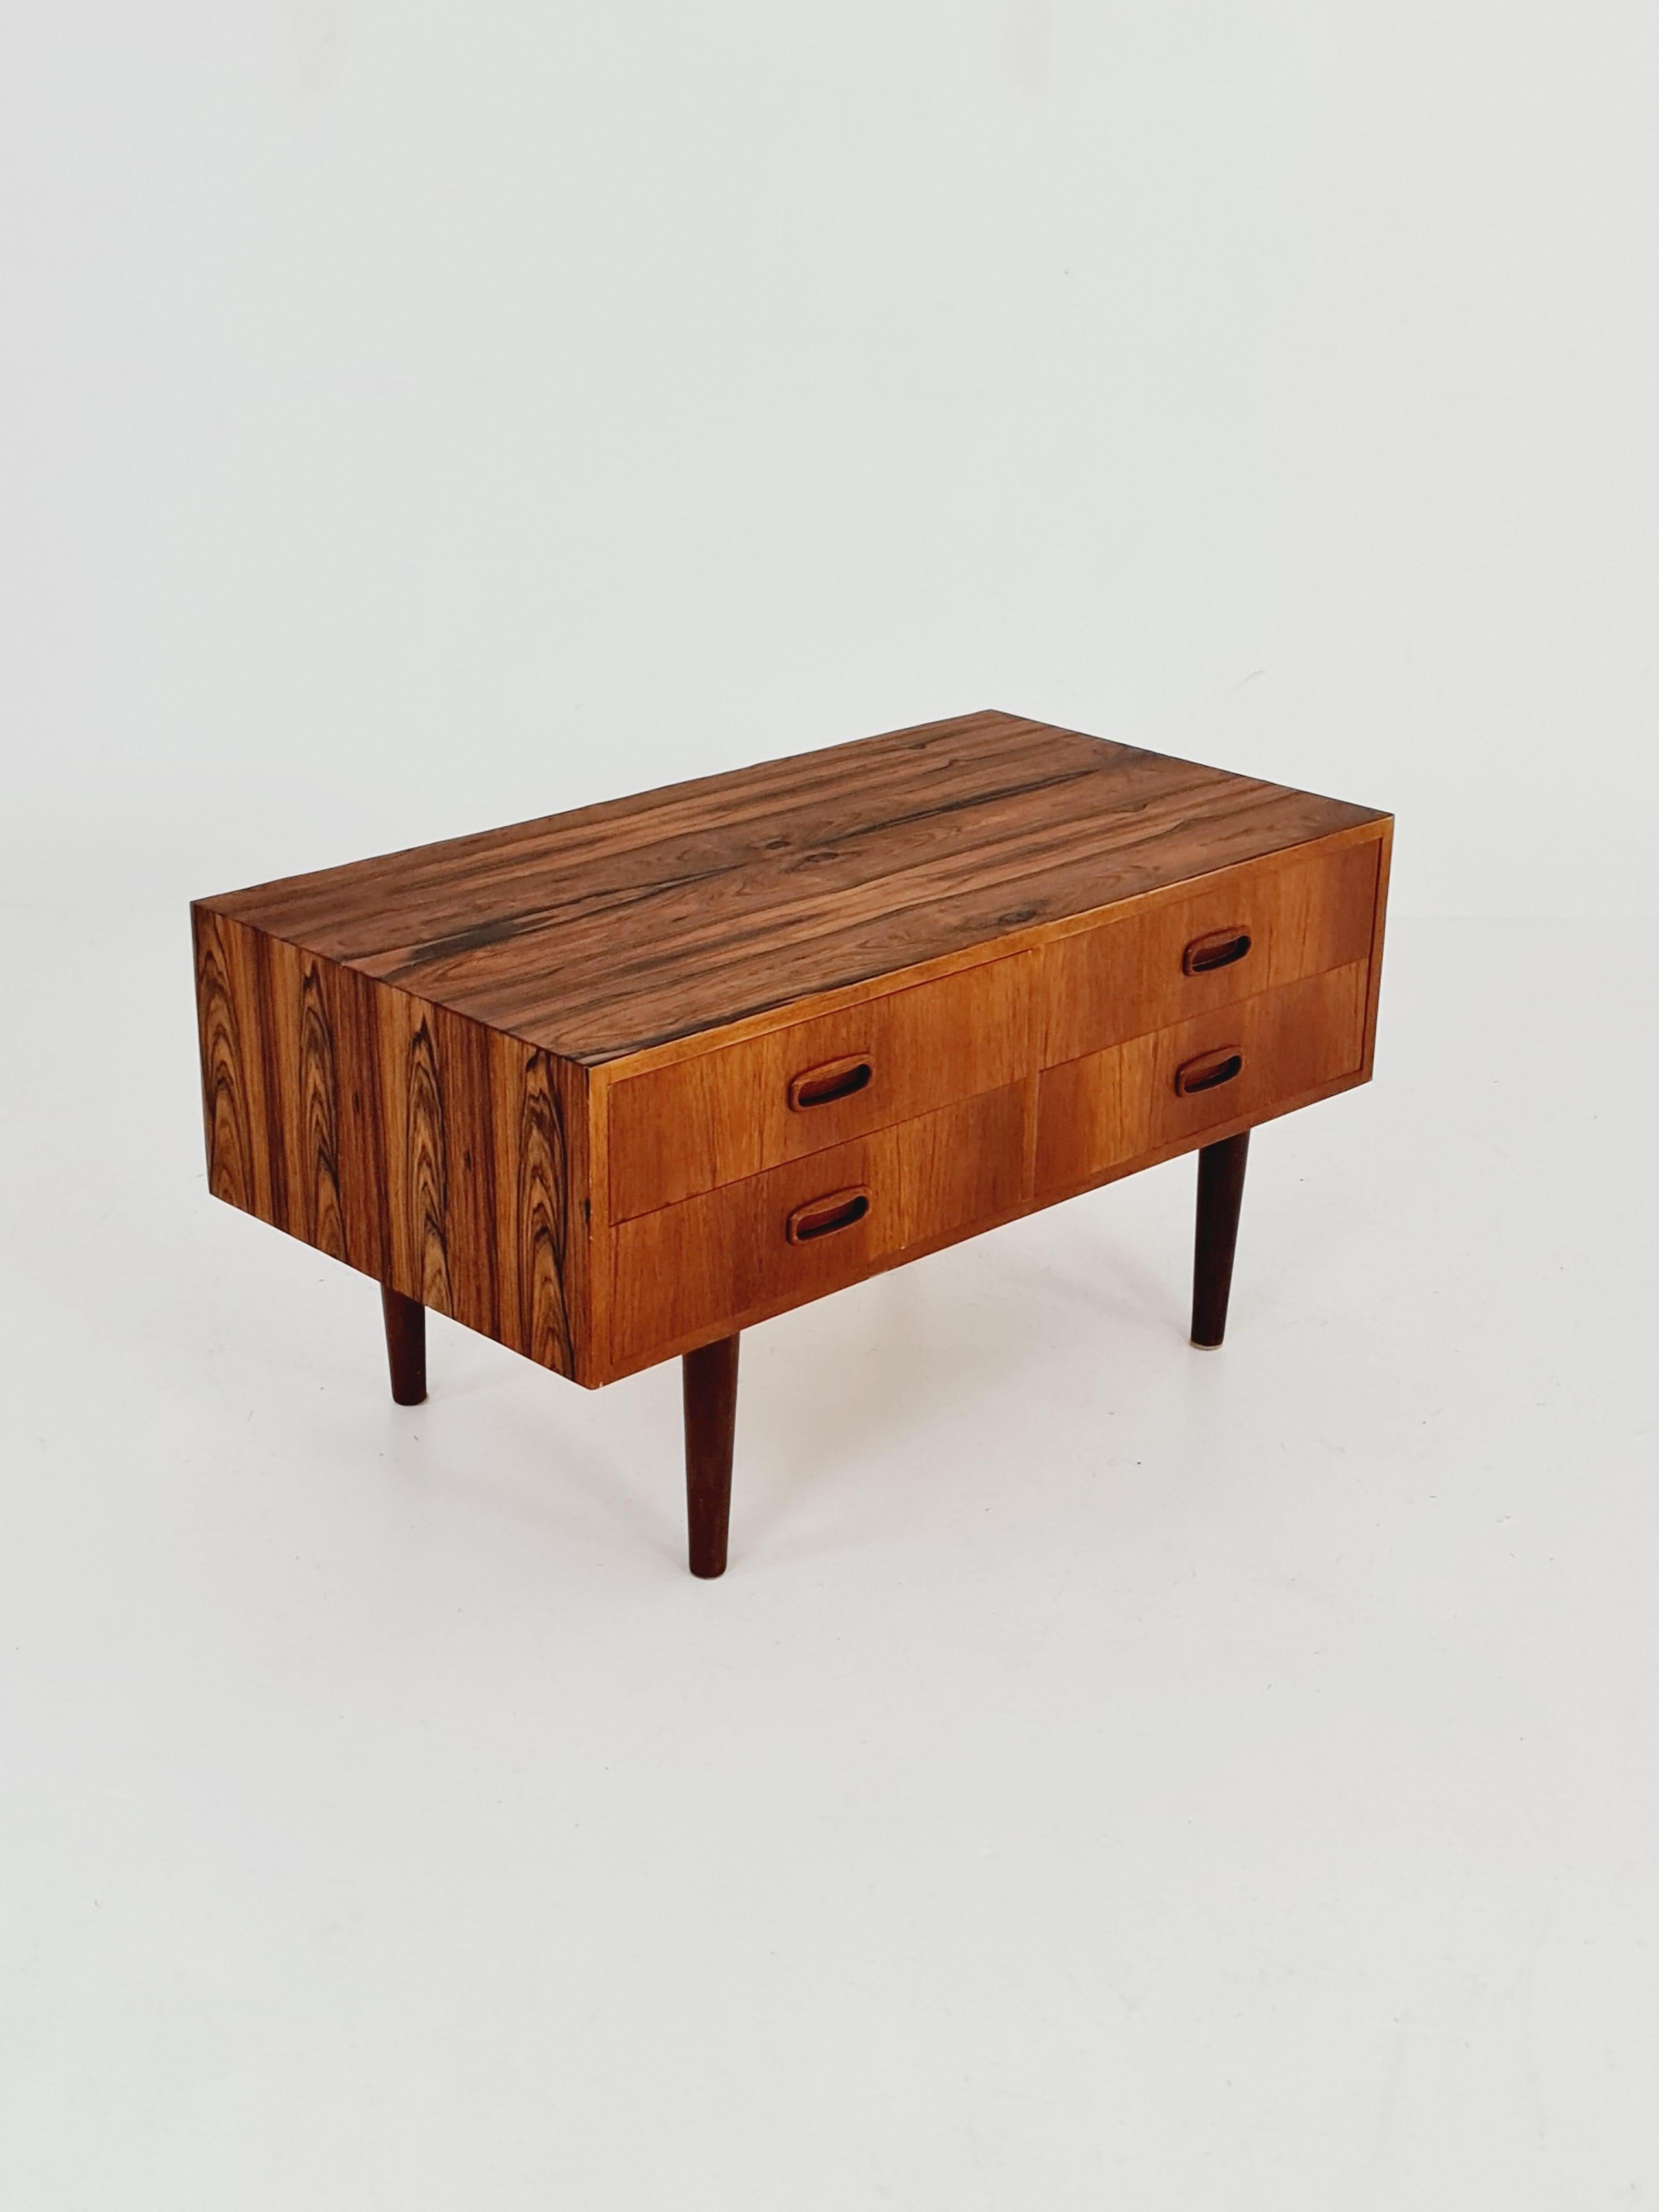 Rare Mid Century Modern Danish Rosewood /Teak  Sideboard 1950s

Design year: 1950s

Dimensions: 
46   D x 87  W x  45  H cm

It is in good vintage condition, however, as with all vintage items some minor wear marks should be expected.

Please